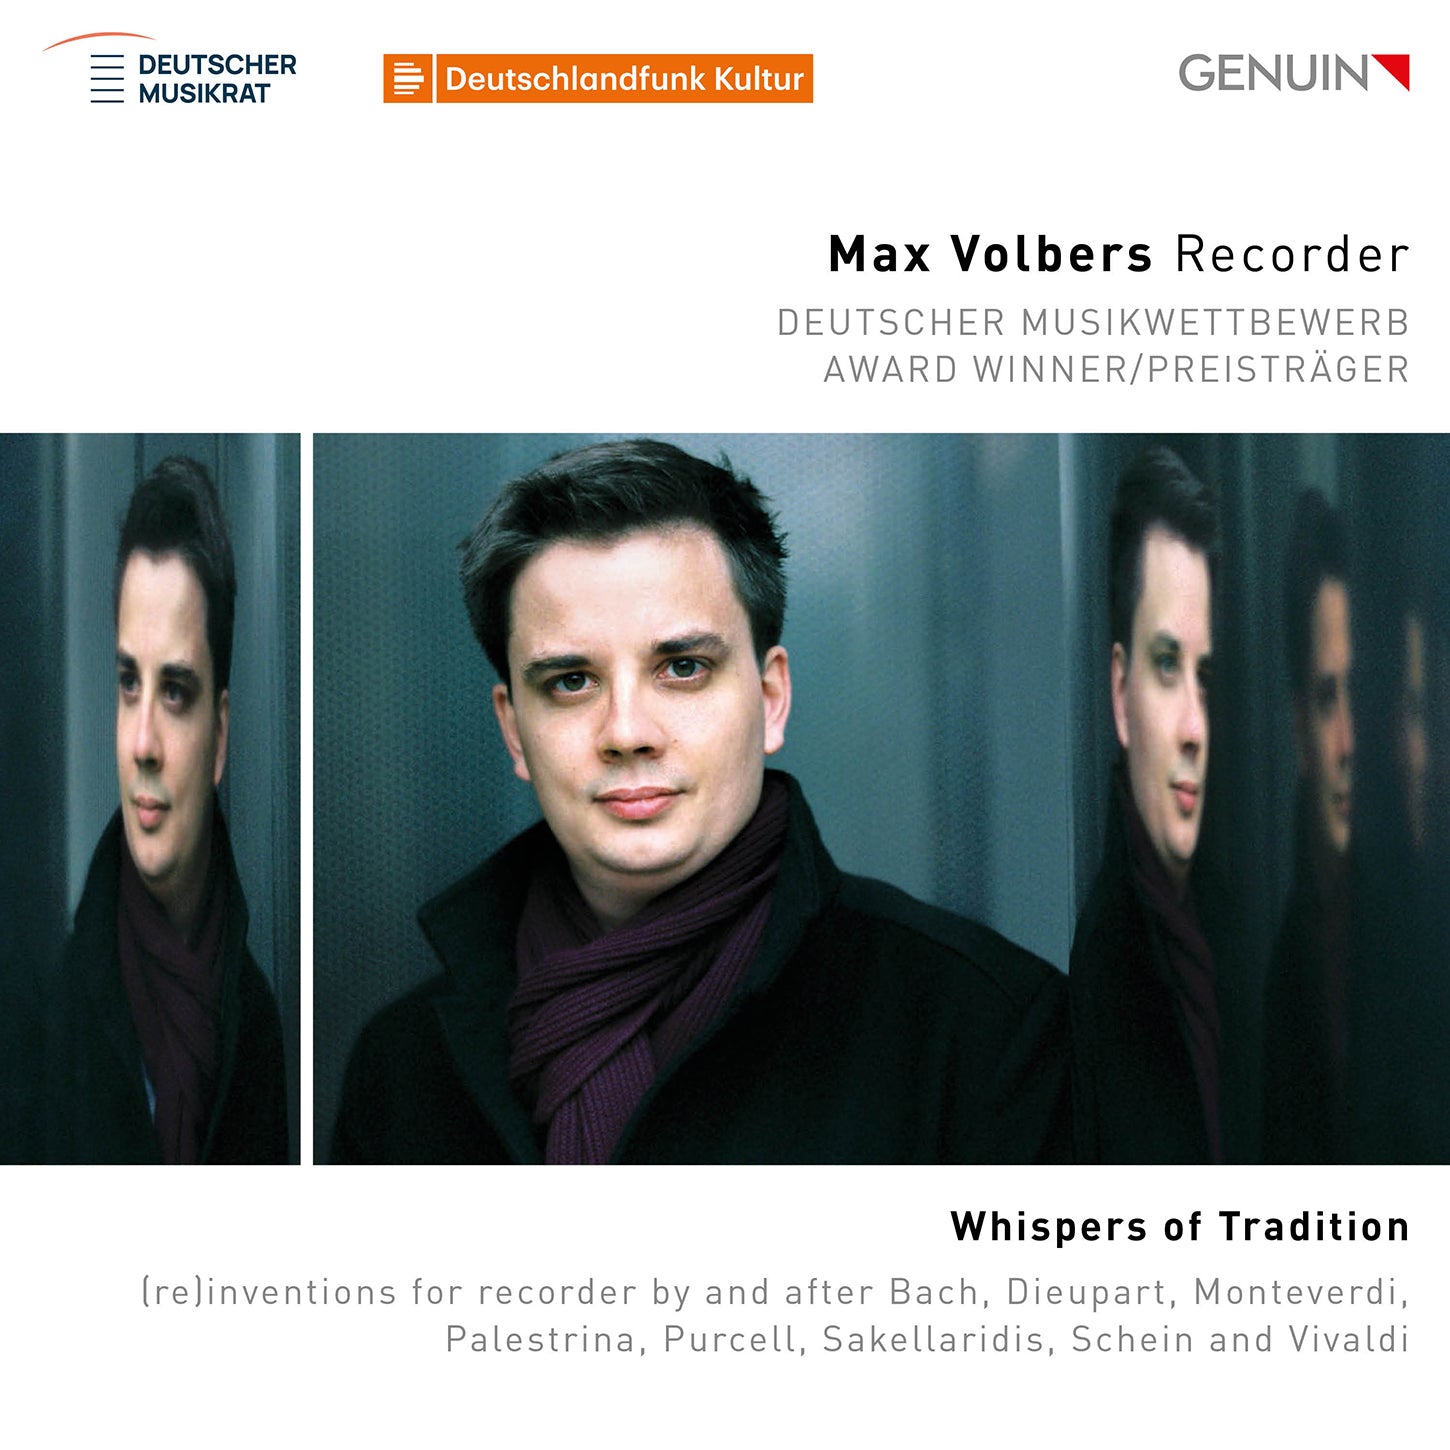 Whispers of Tradition - Reinventions of Bach, Vivaldi, Purcell et al. / Volbers